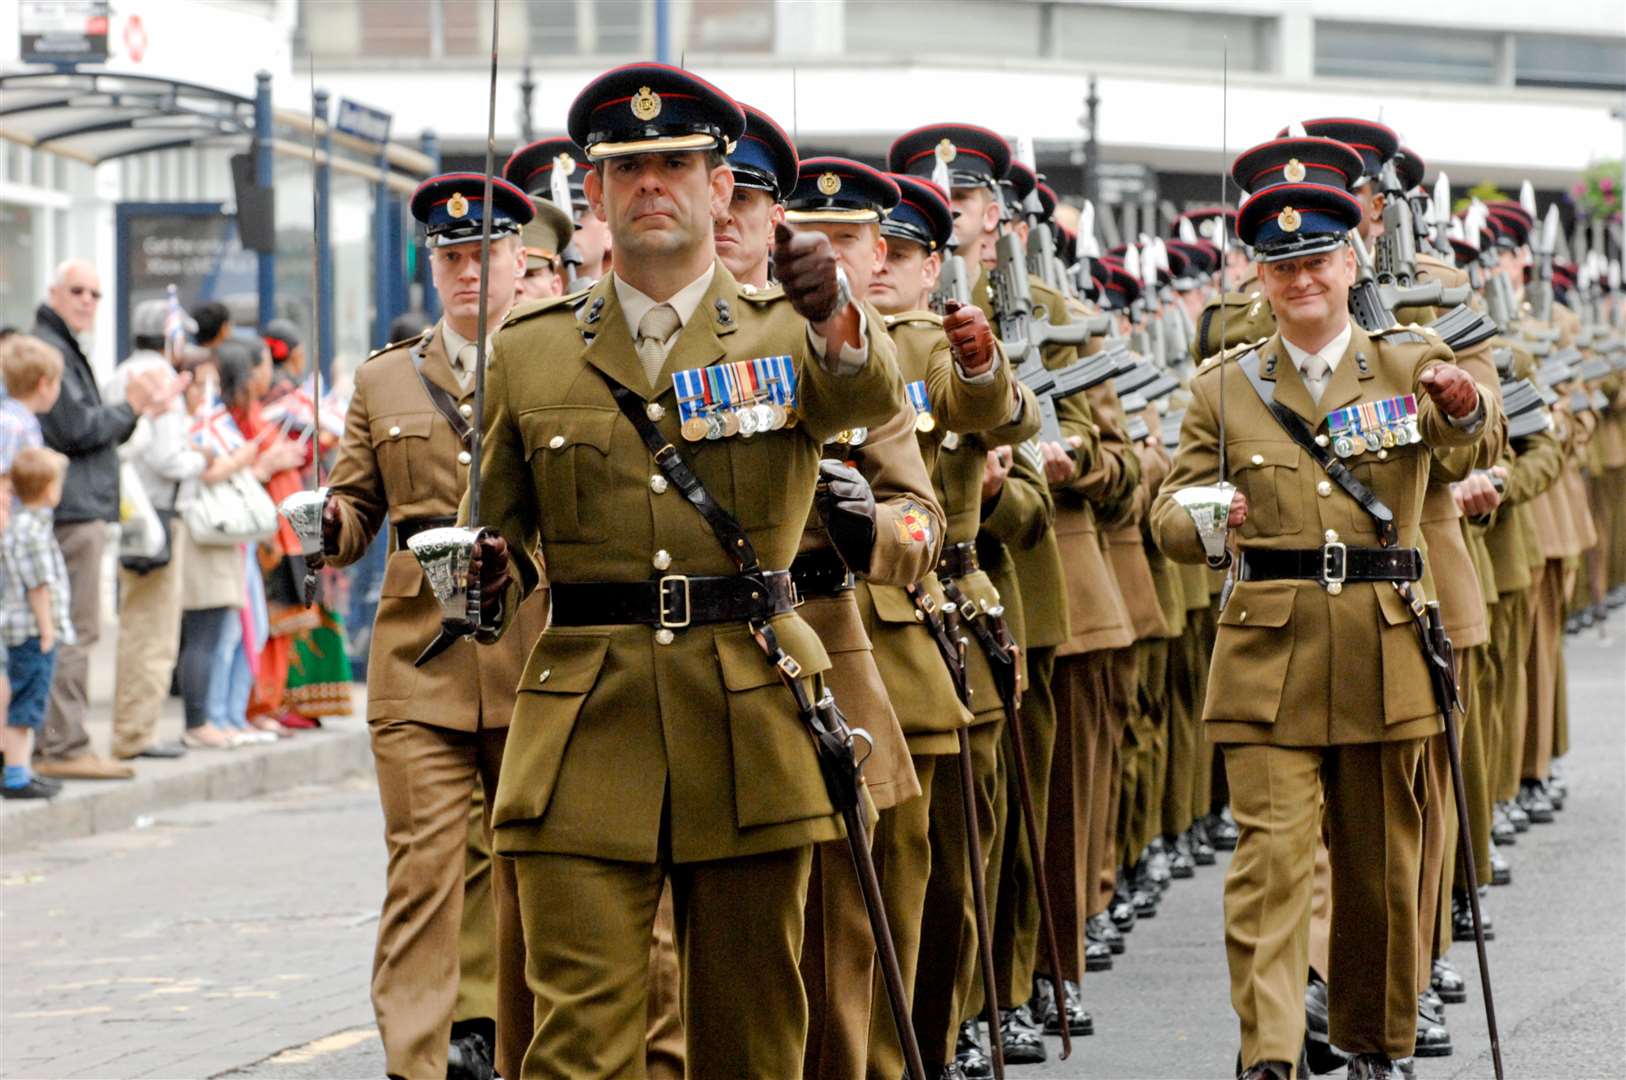 The 36 Engineer Regiment will march through Maidstone